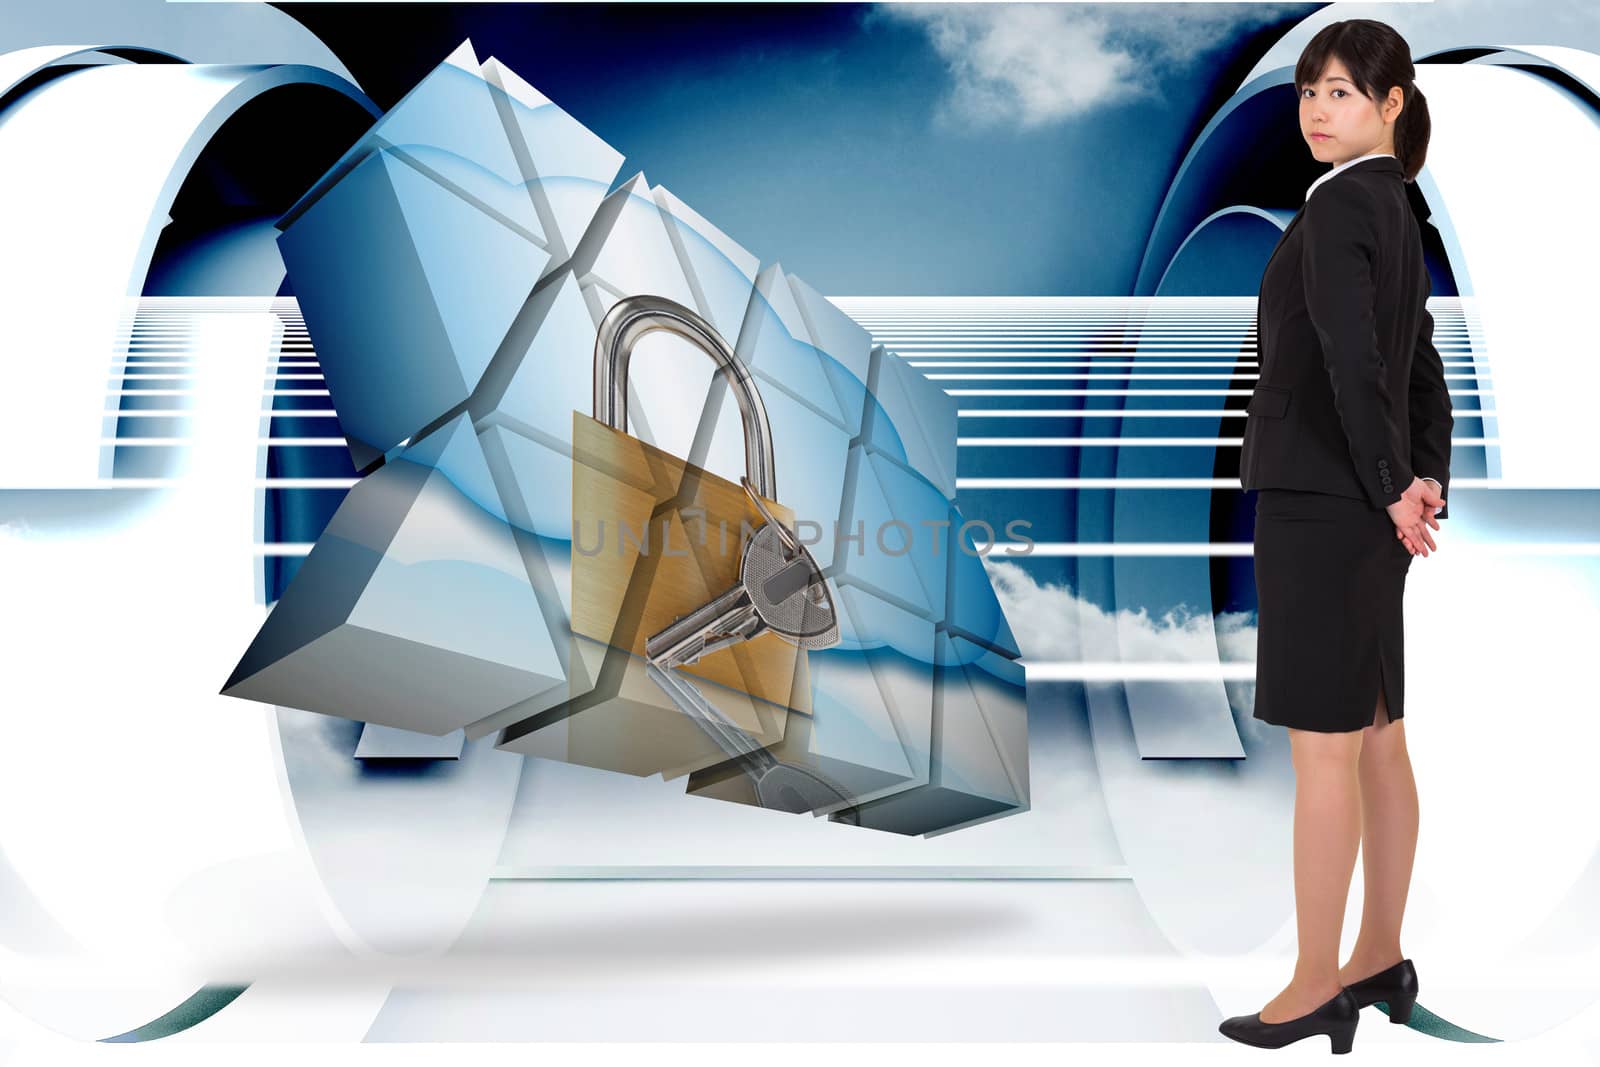 Serious businesswoman against abstract cloud design in futuristic structure